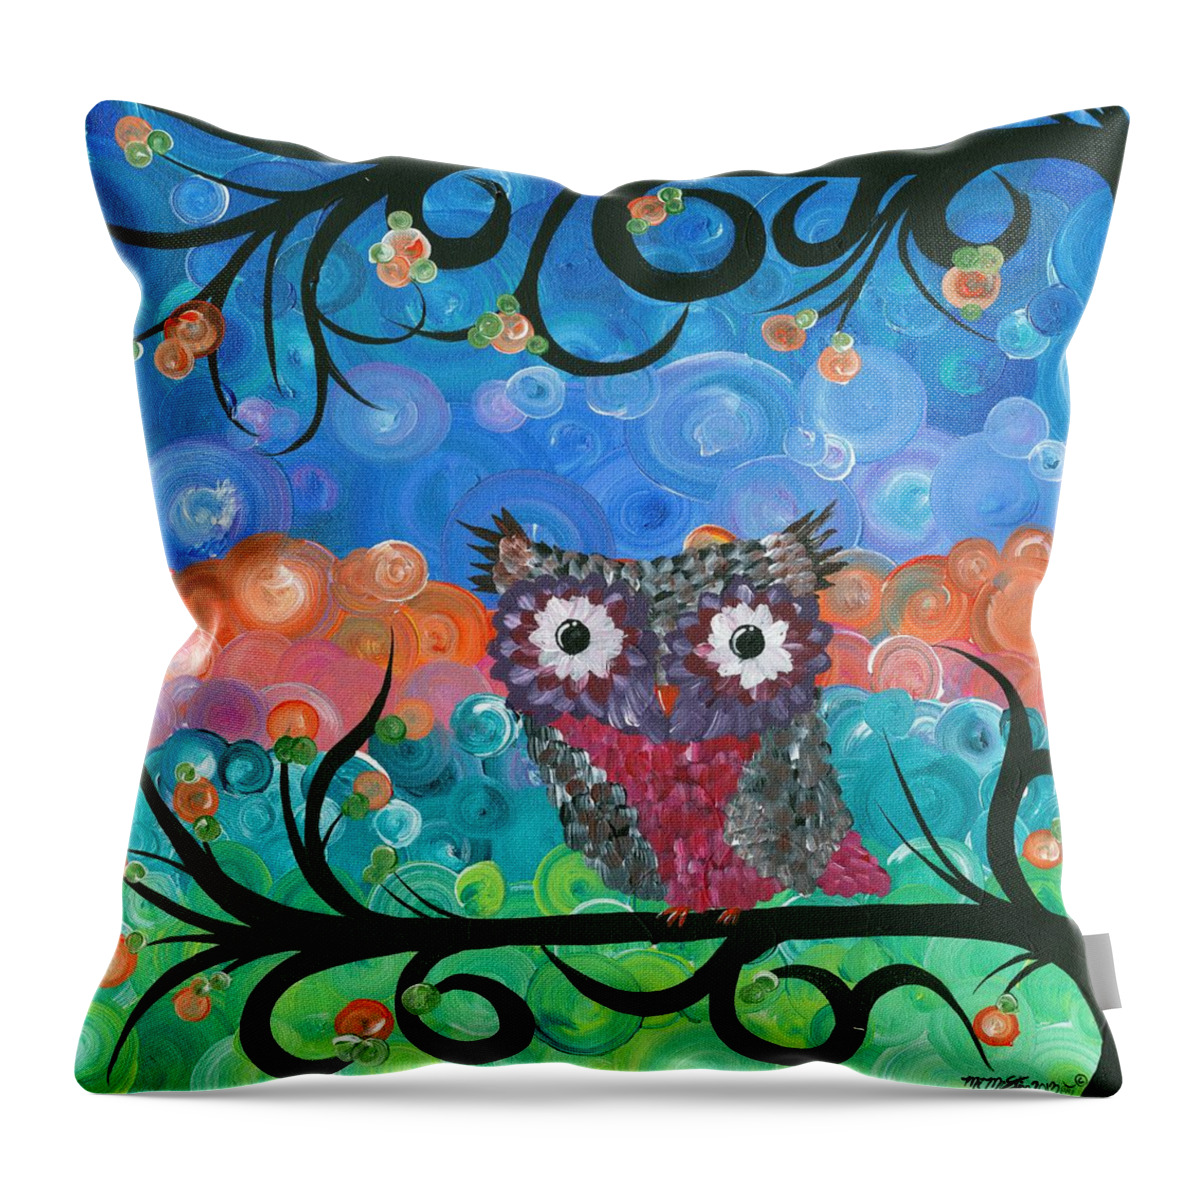 Owls Throw Pillow featuring the painting Owl Expressions - 02 by MiMi Stirn